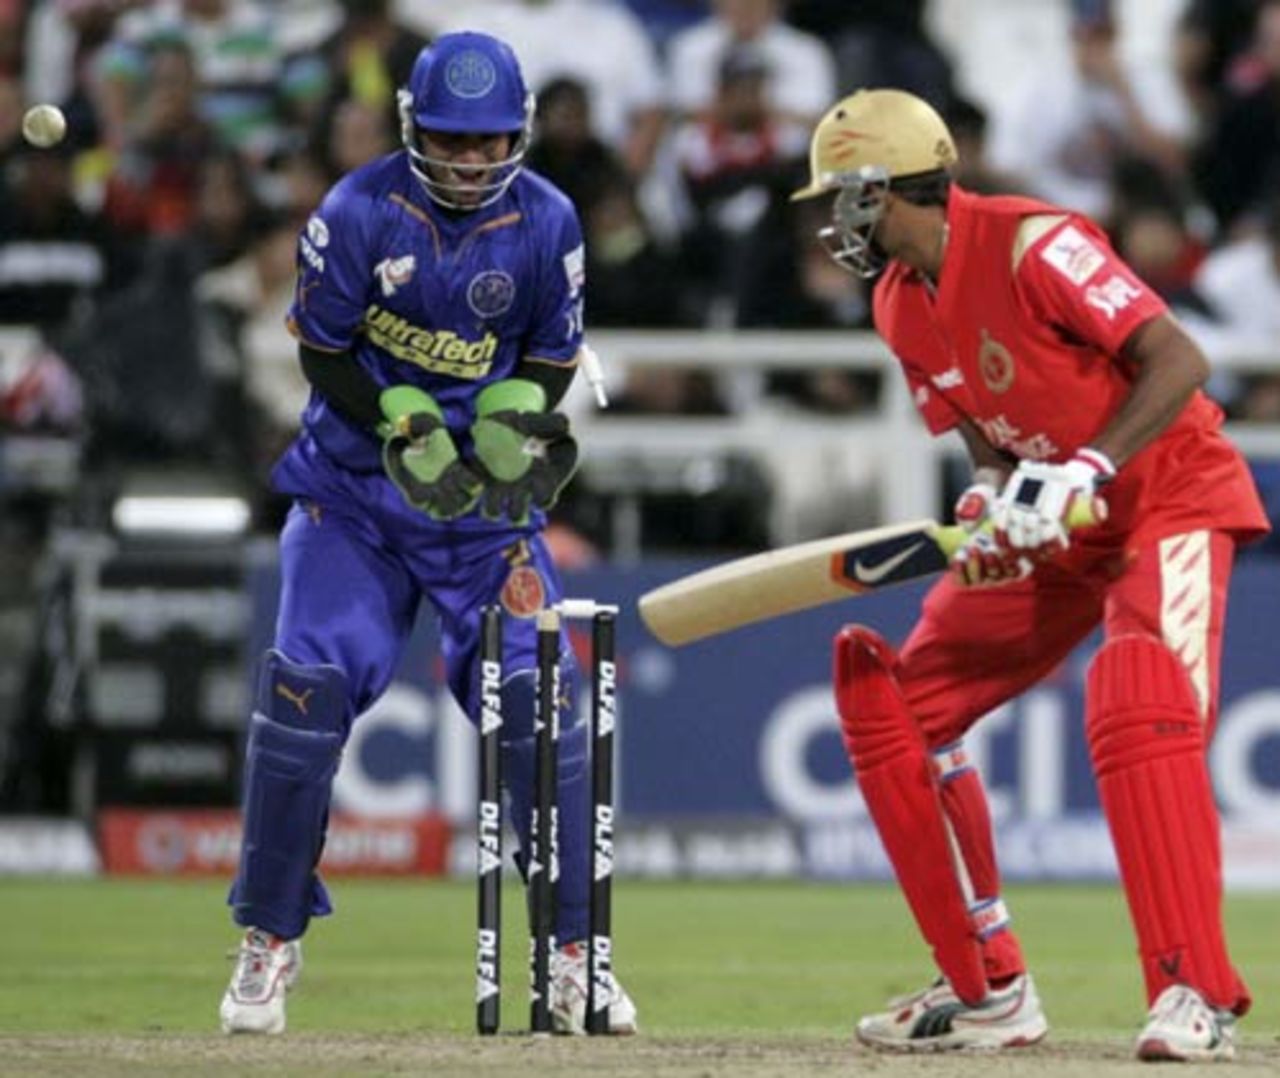 B Akhil is undone by Shane Warne's legspinner, Bangalore Royal Challengers v Rajasthan Royals IPL, 2nd game, Cape Town, April 18, 2009